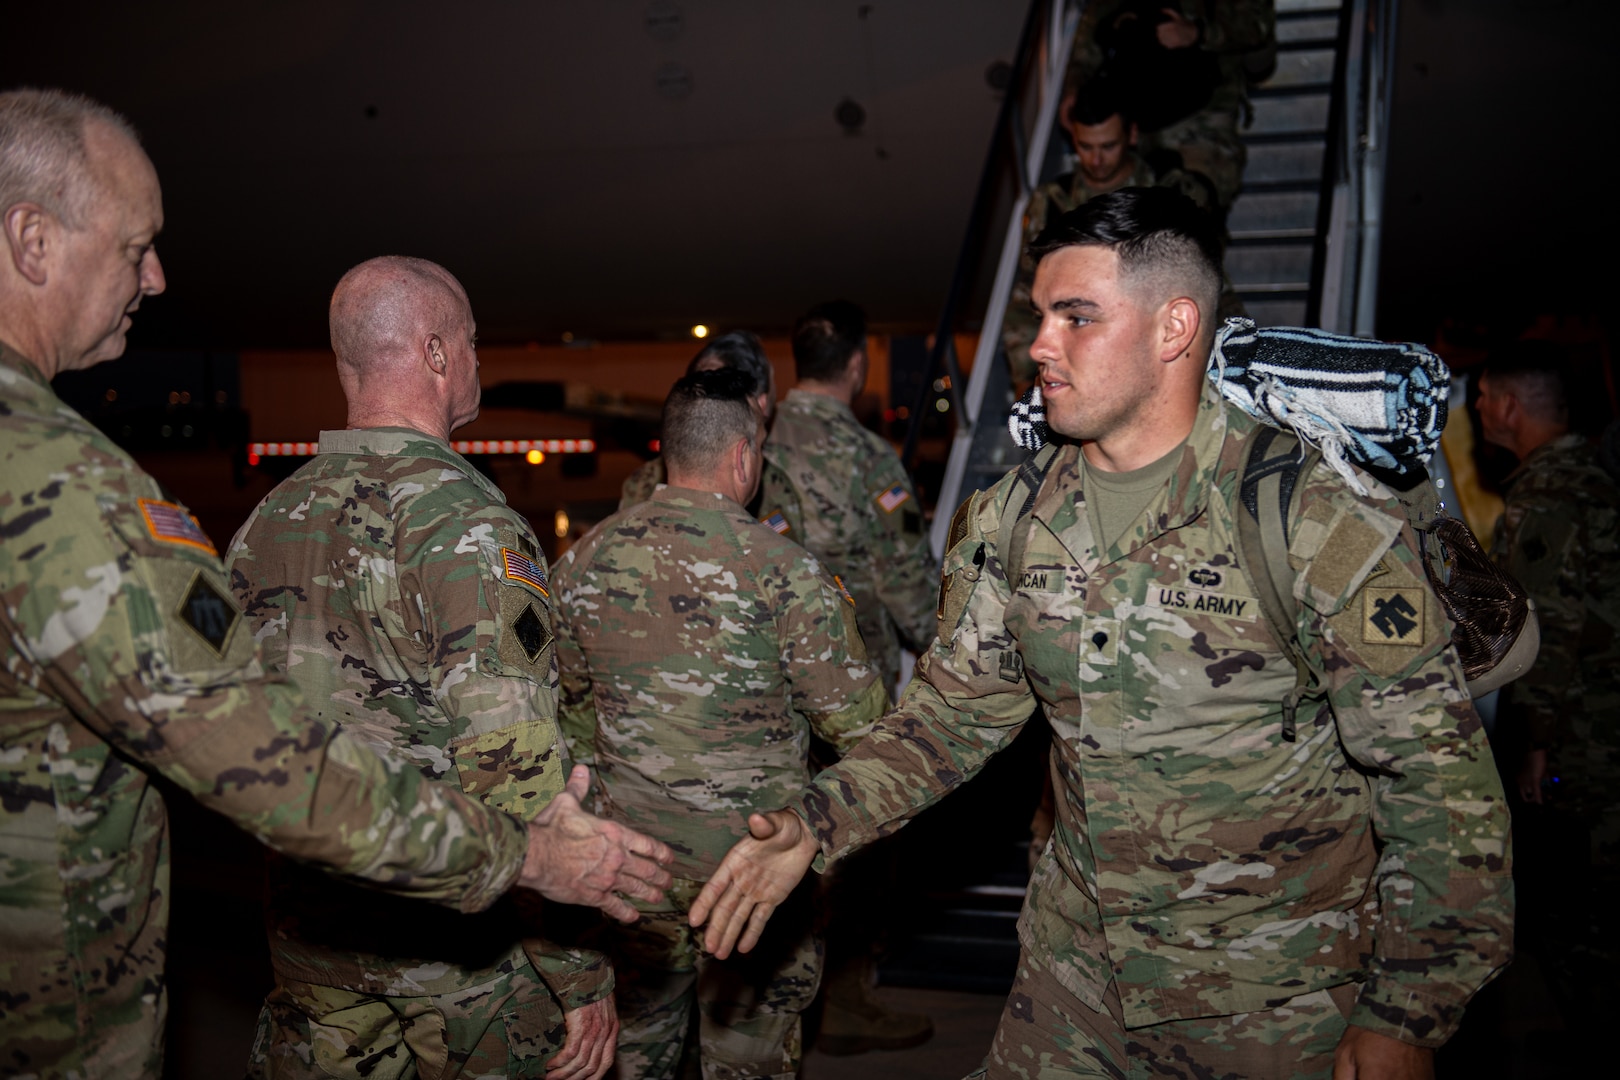 Members of Task Force Tomahawk arrive at Fort Bliss, Texas, Feb. 18, 2024, for demobilization following a nine-month deployment to the Horn of Africa. Task Force Tomahawk is made up of units of the 45th Infantry Brigade Combat Team - primarily of the 1st Battalion, 179th Infantry Regiment as well as companies from the 1st Battalion, 279th Infantry Regiment and 2nd Battalion, 134th Infantry Regiment (Airborne). TF Tomahawk was responsible for security at multiple locations across several countries in the Horn of Africa as well as manning the East African Response Force. (Oklahoma National Guard photo by Anthony Jones)